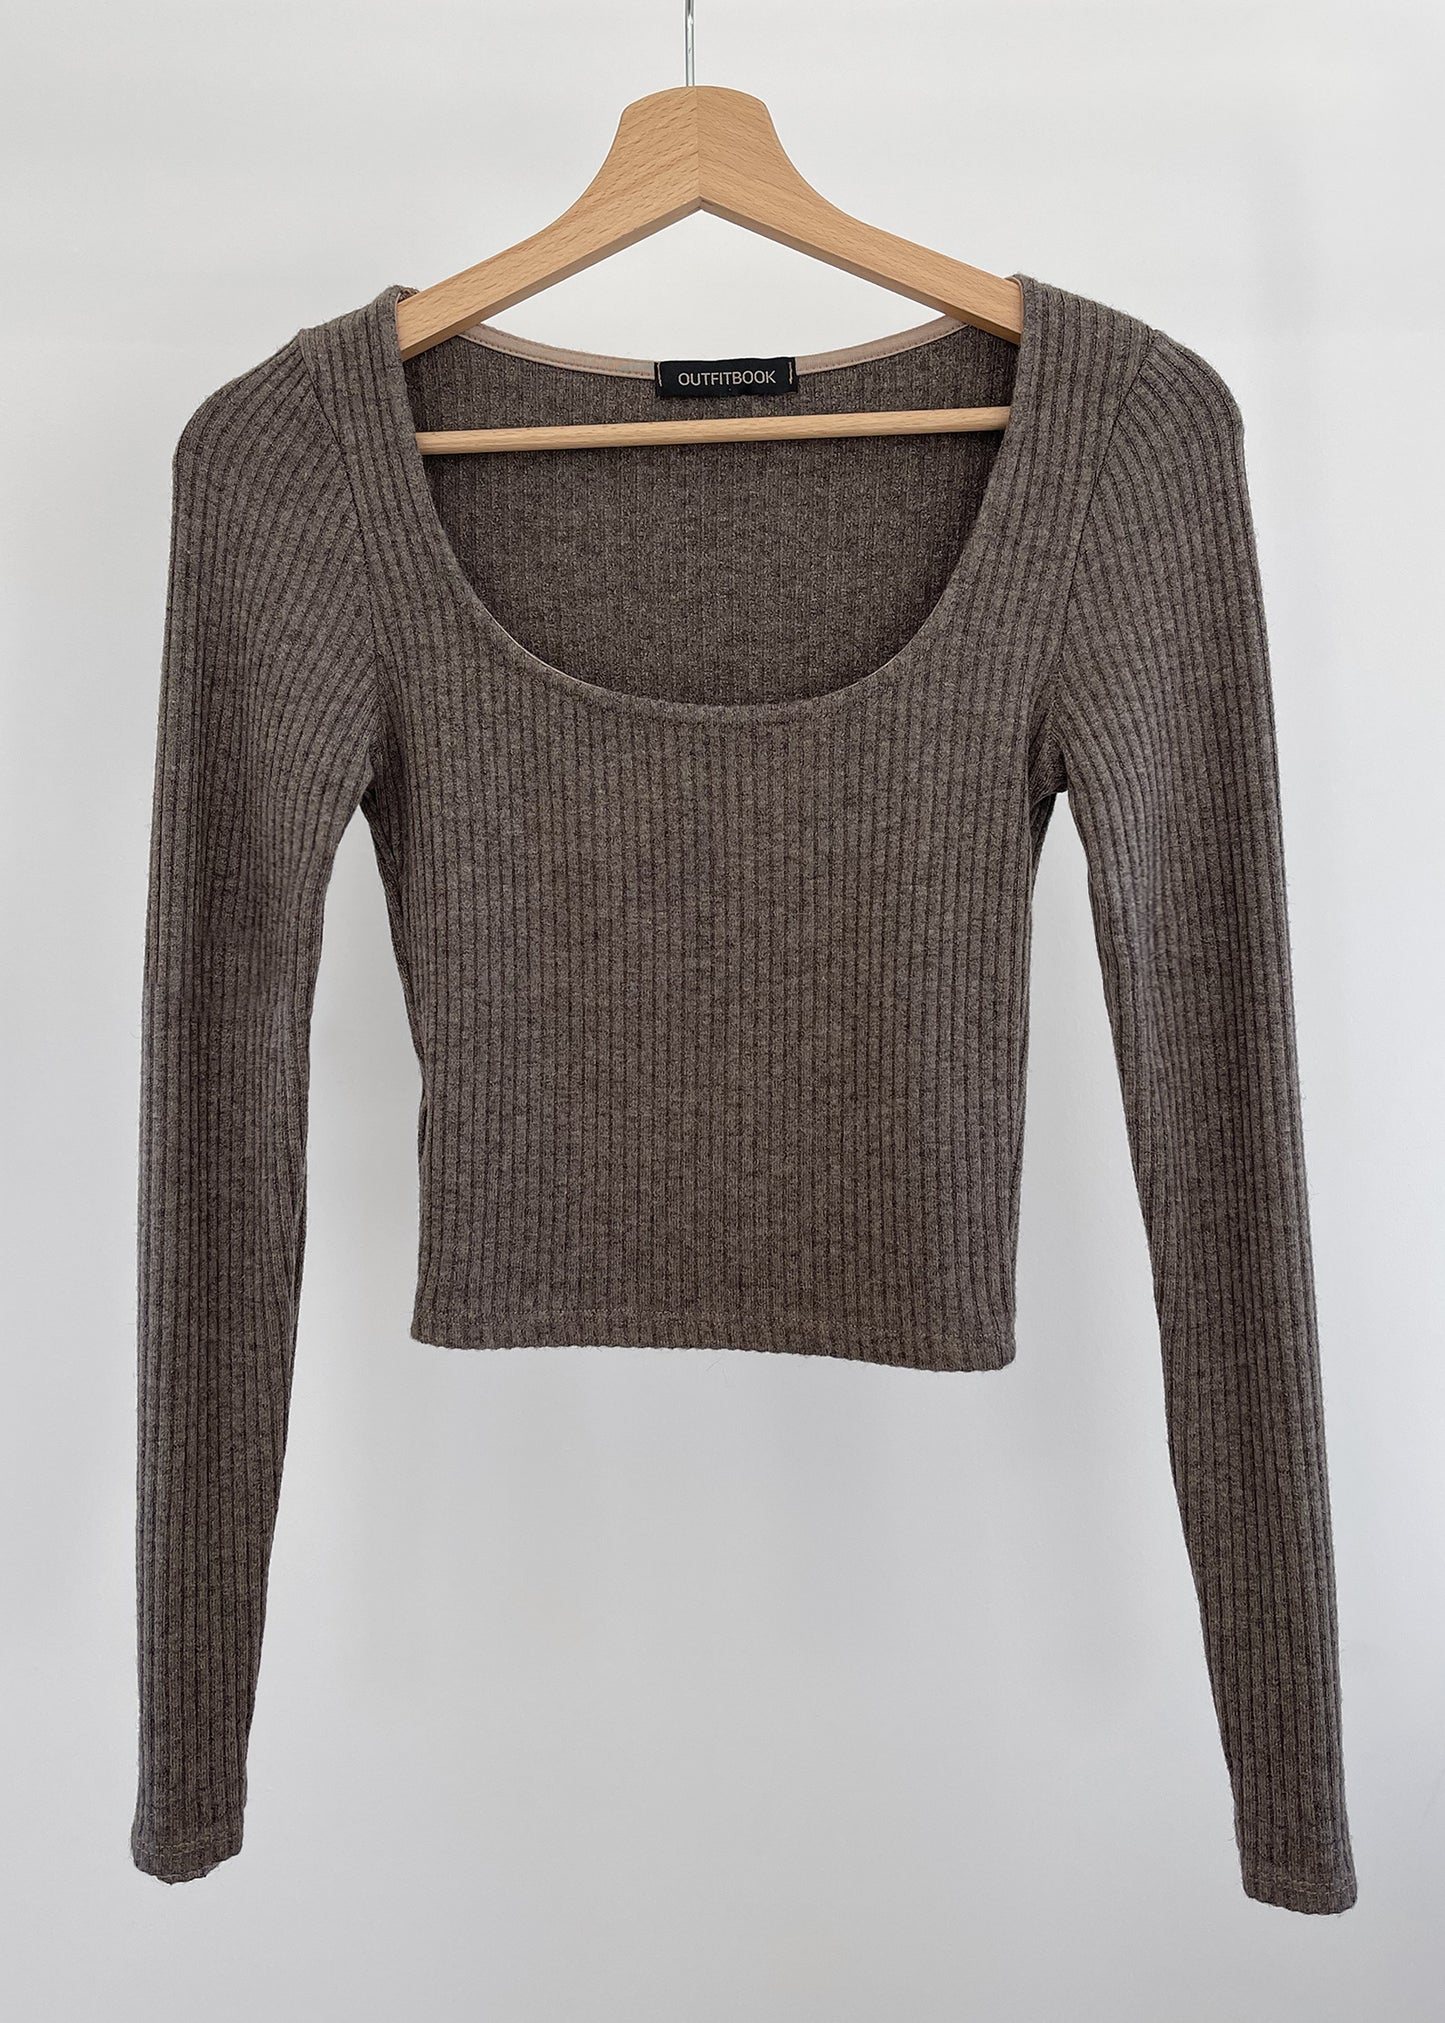 Ribbed top with square neck in brown